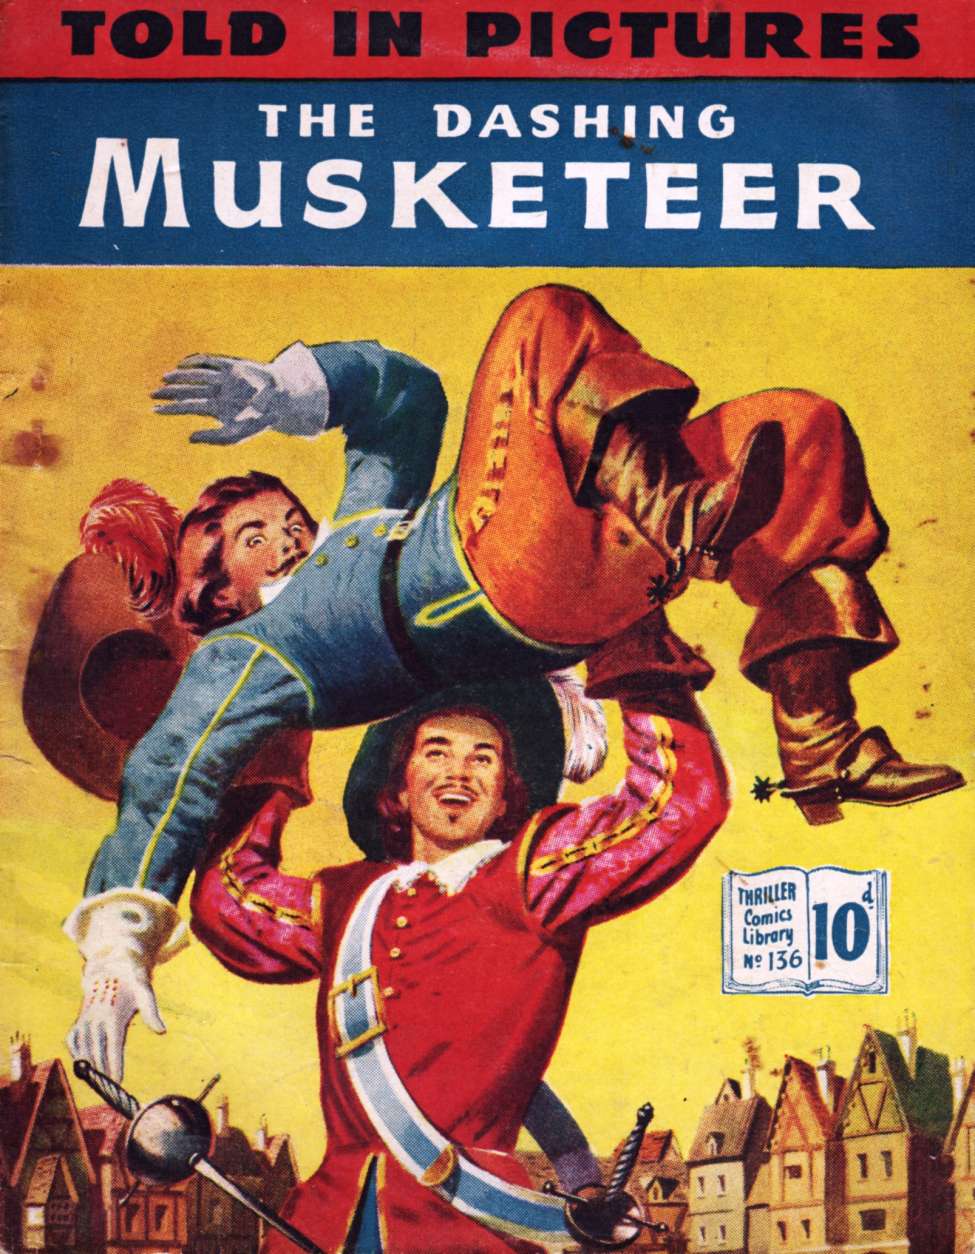 Book Cover For Thriller Comics Library 136 - The Dashing Musketeer